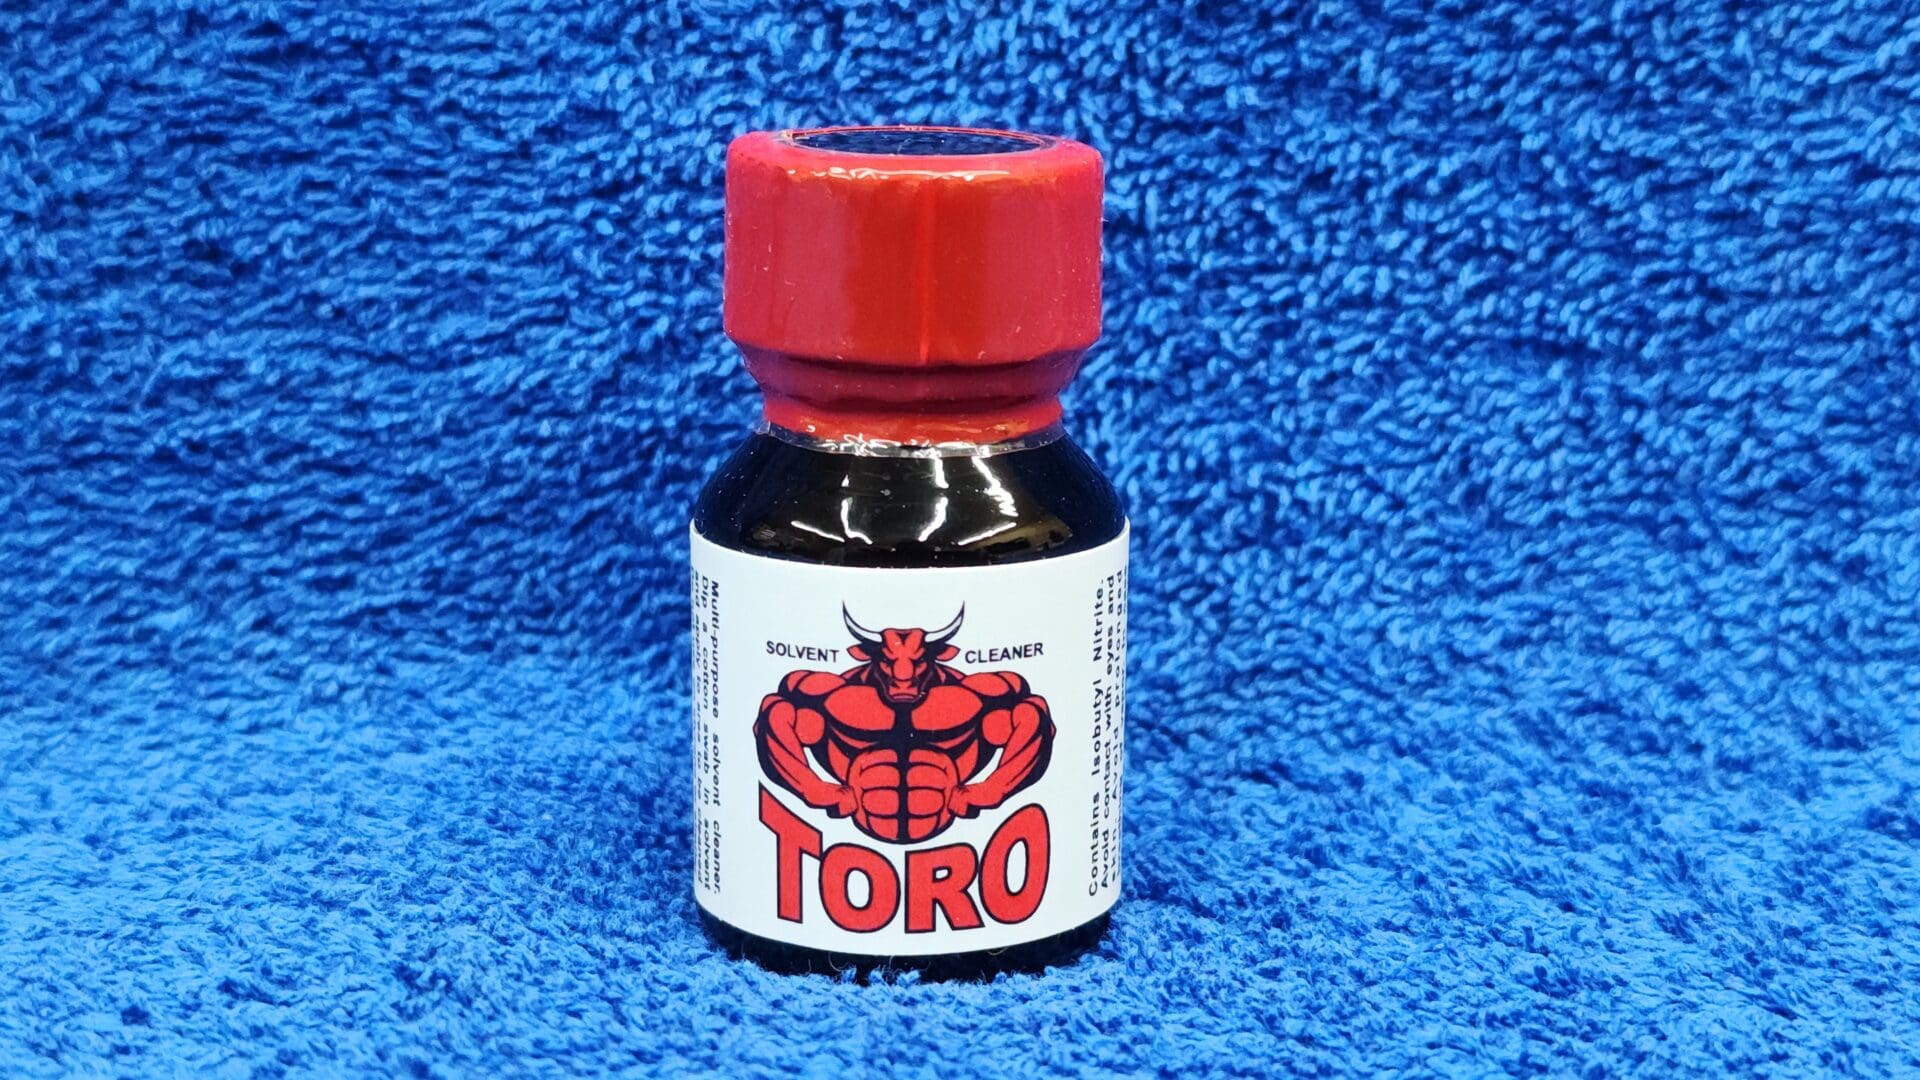 A small bottle of Toro solvent cleaner with a red cap, labeled with a graphic of a muscular lobster, on a blue textured background.